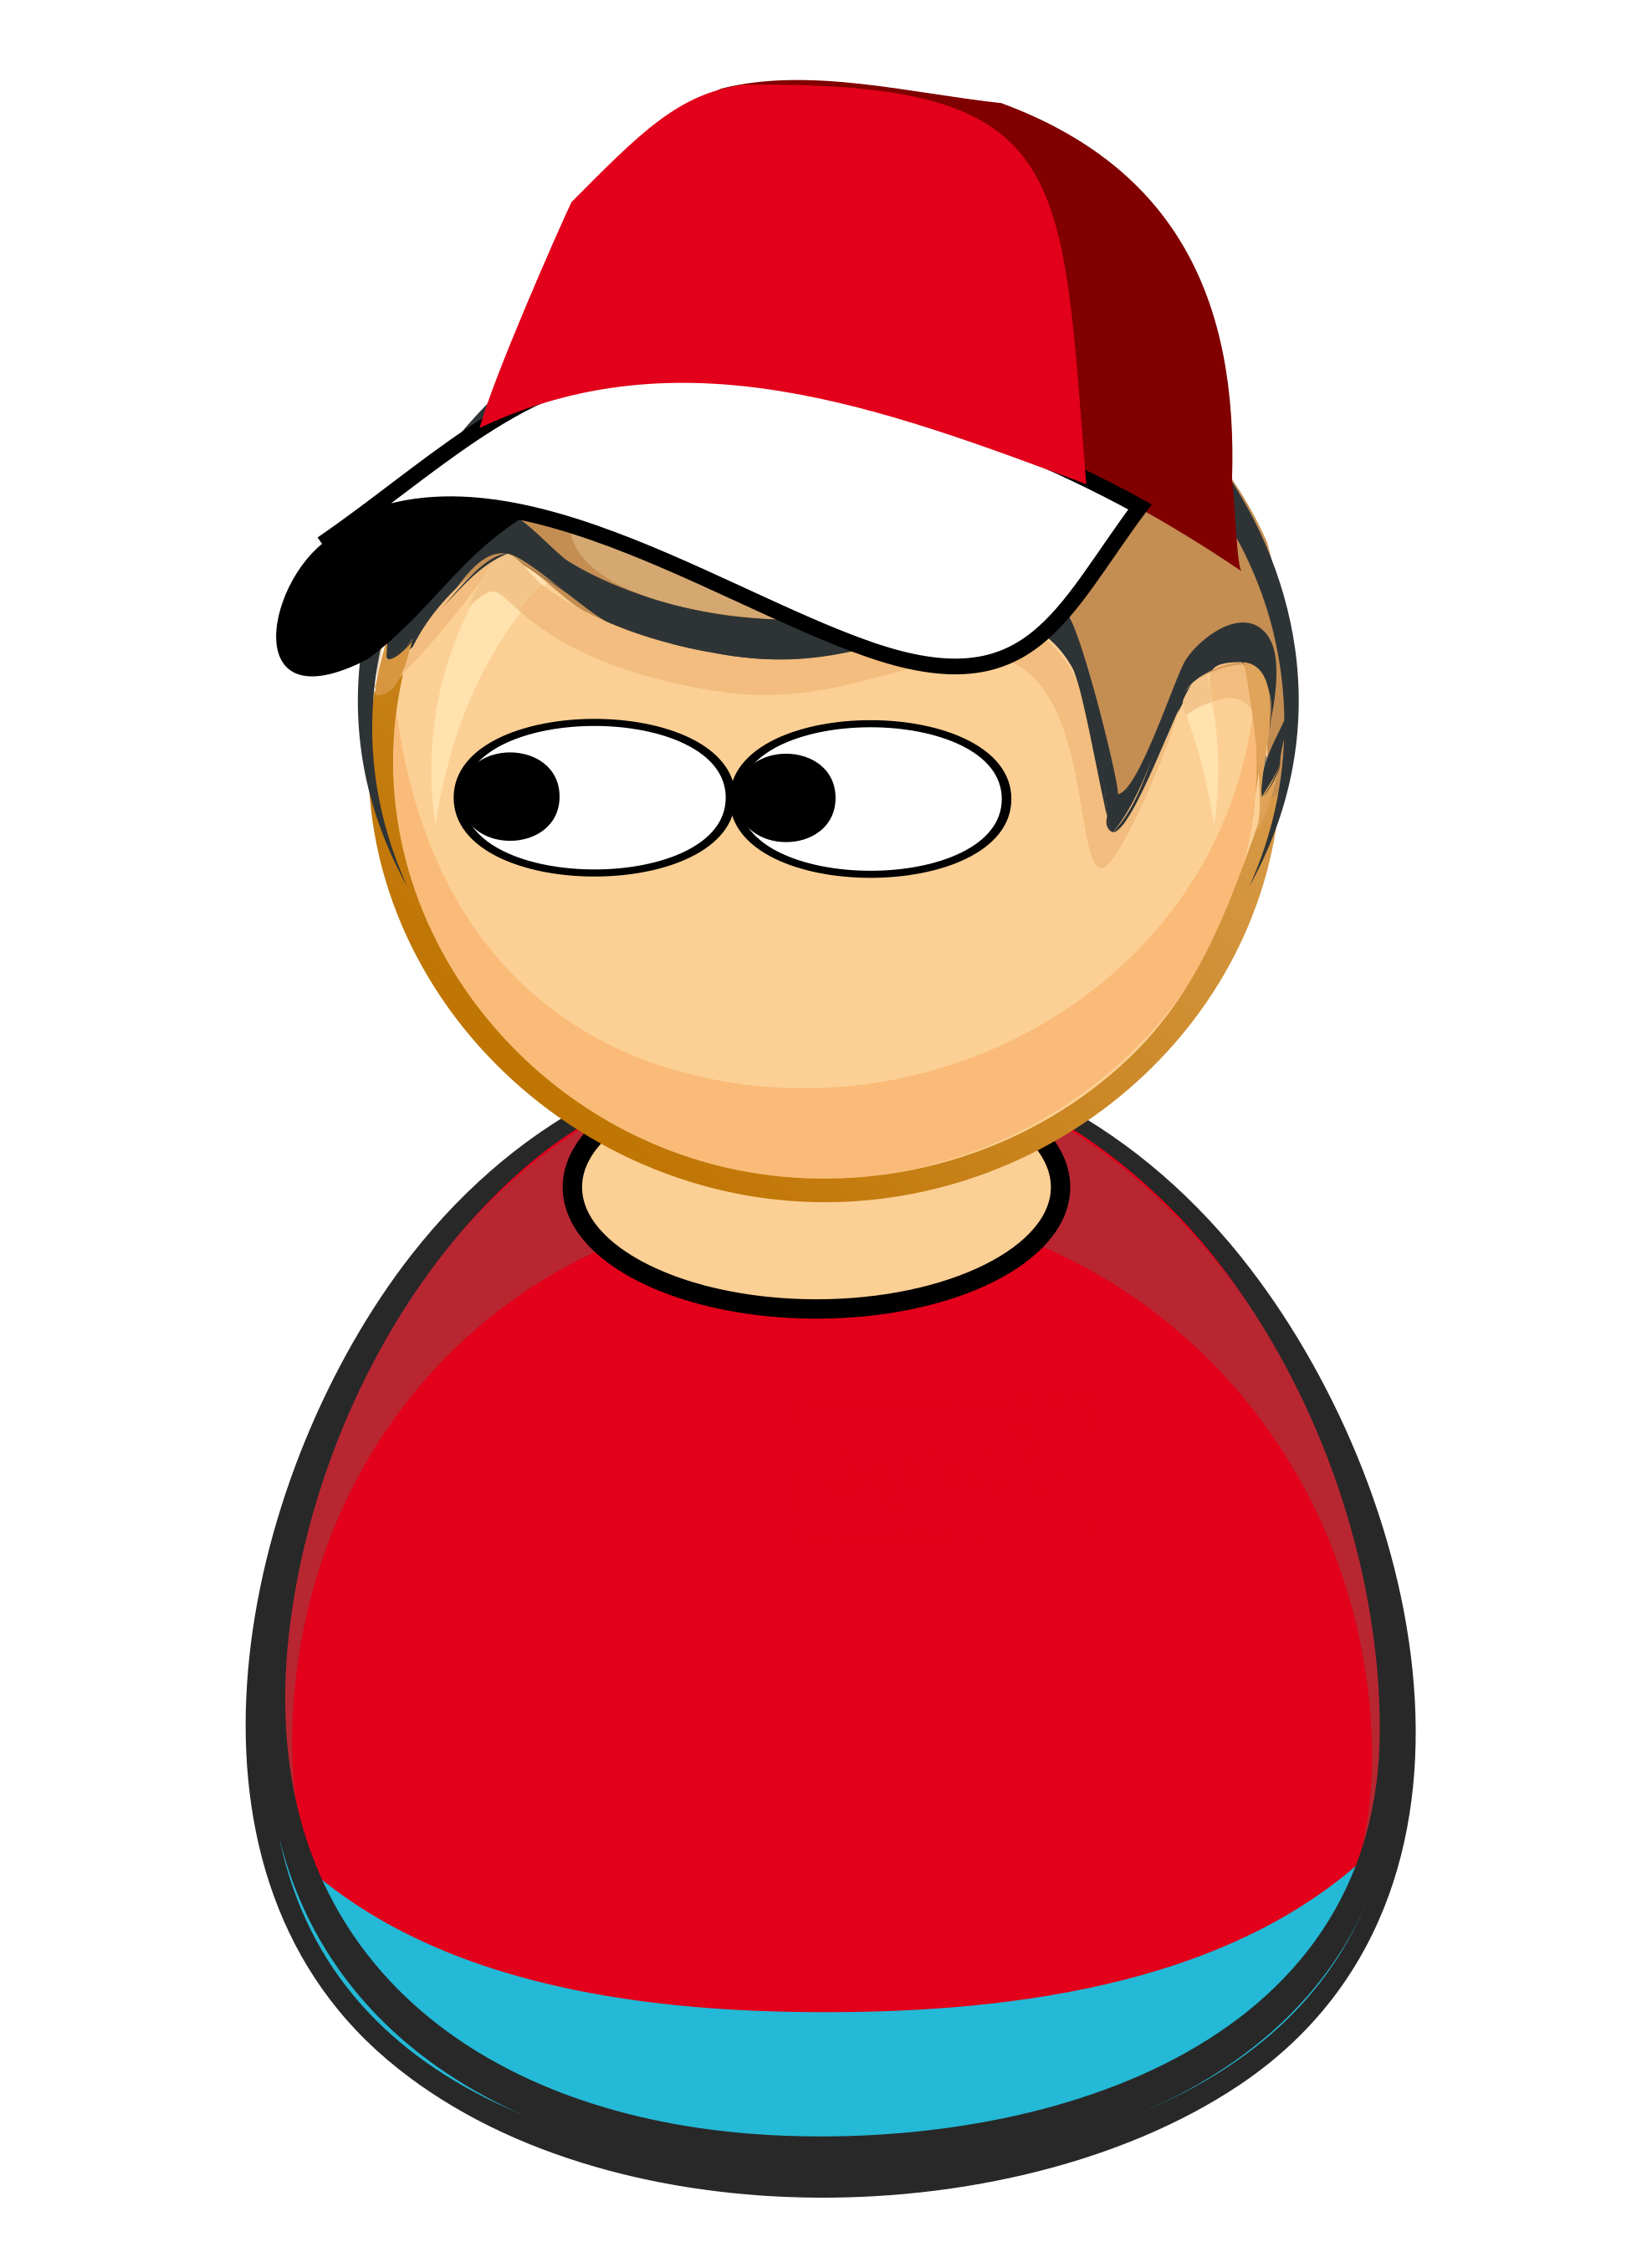 Cartoon person character with. Young clipart relative